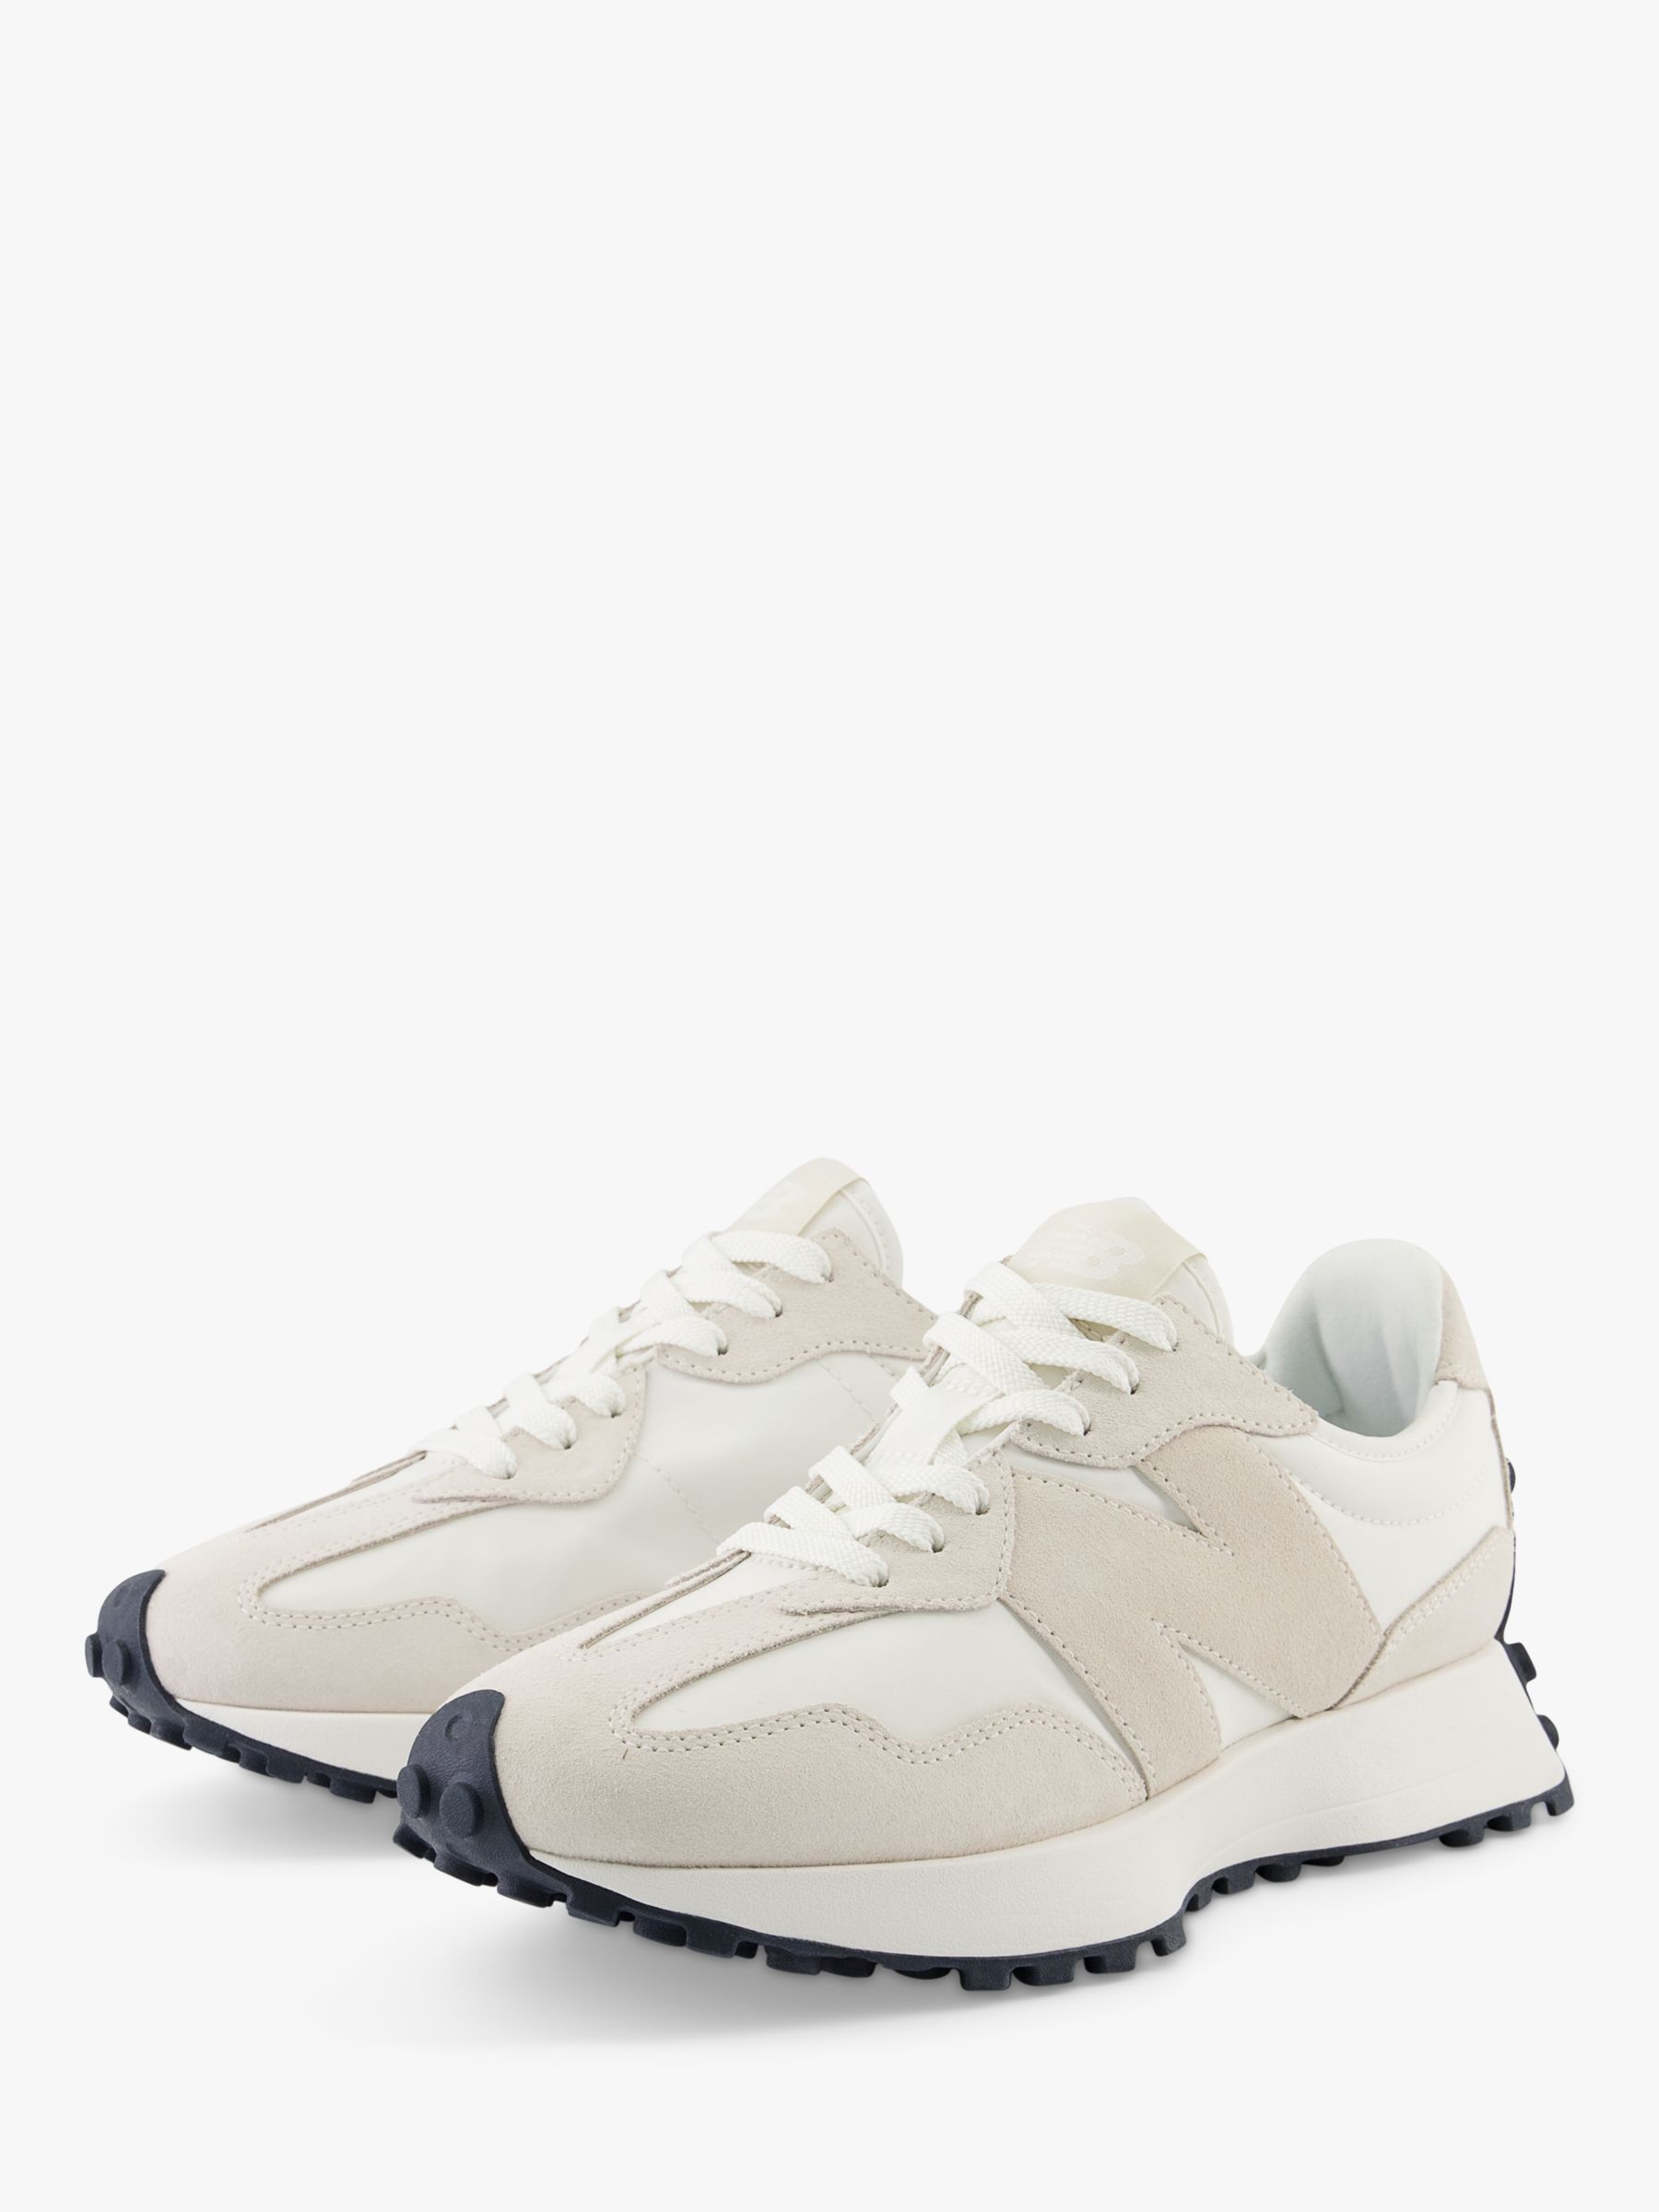 Buy New Balance 327 Trainers Online at johnlewis.com